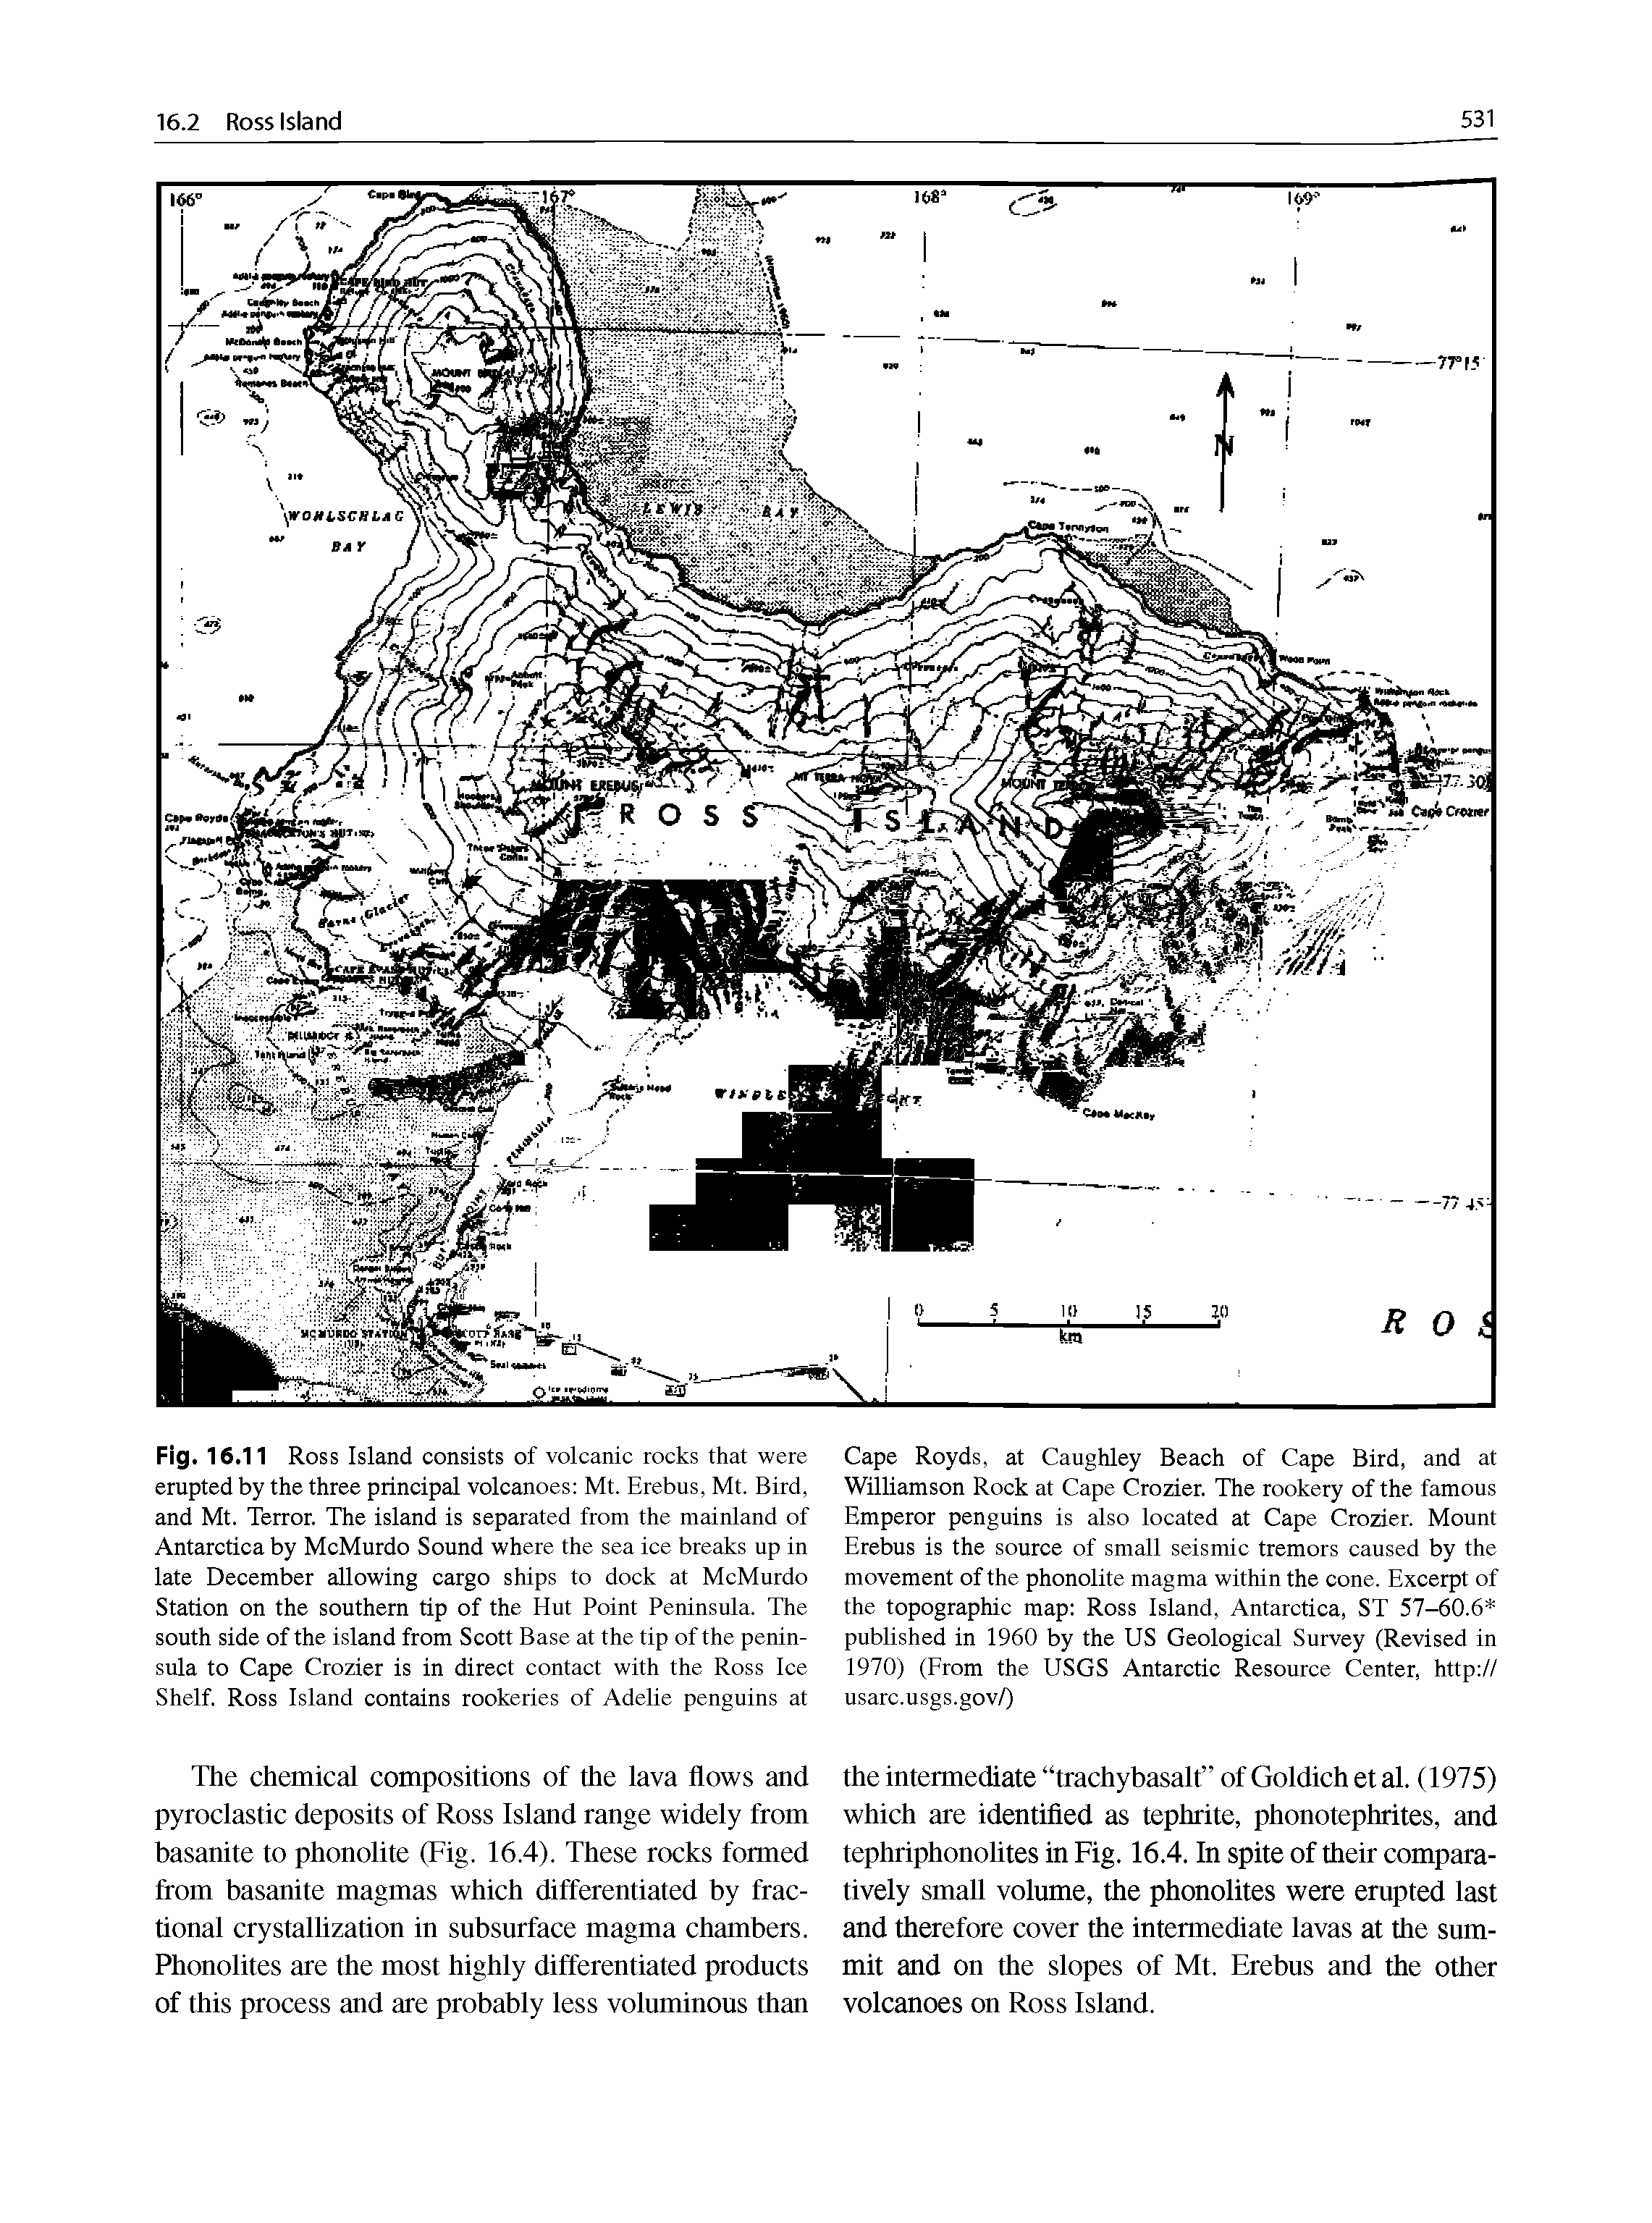 Fig. 16.11 Ross Island consists of volcanic rocks that were erupted by the three principal volcanoes Mt. Erebus, Mt. Bird, and Mt. Terror. The island is separated from the mainland of Antarctica by McMurdo Sound where the sea ice breaks up in late December allowing cargo ships to dock at McMurdo Station on the southern tip of the Hut Point Peninsula. The south side of the island from Scott Base at the tip of the peninsula to Cape Crozier is in direct contact with the Ross Ice Shelf. Ross Island contains rookeries of Adelie penguins at...